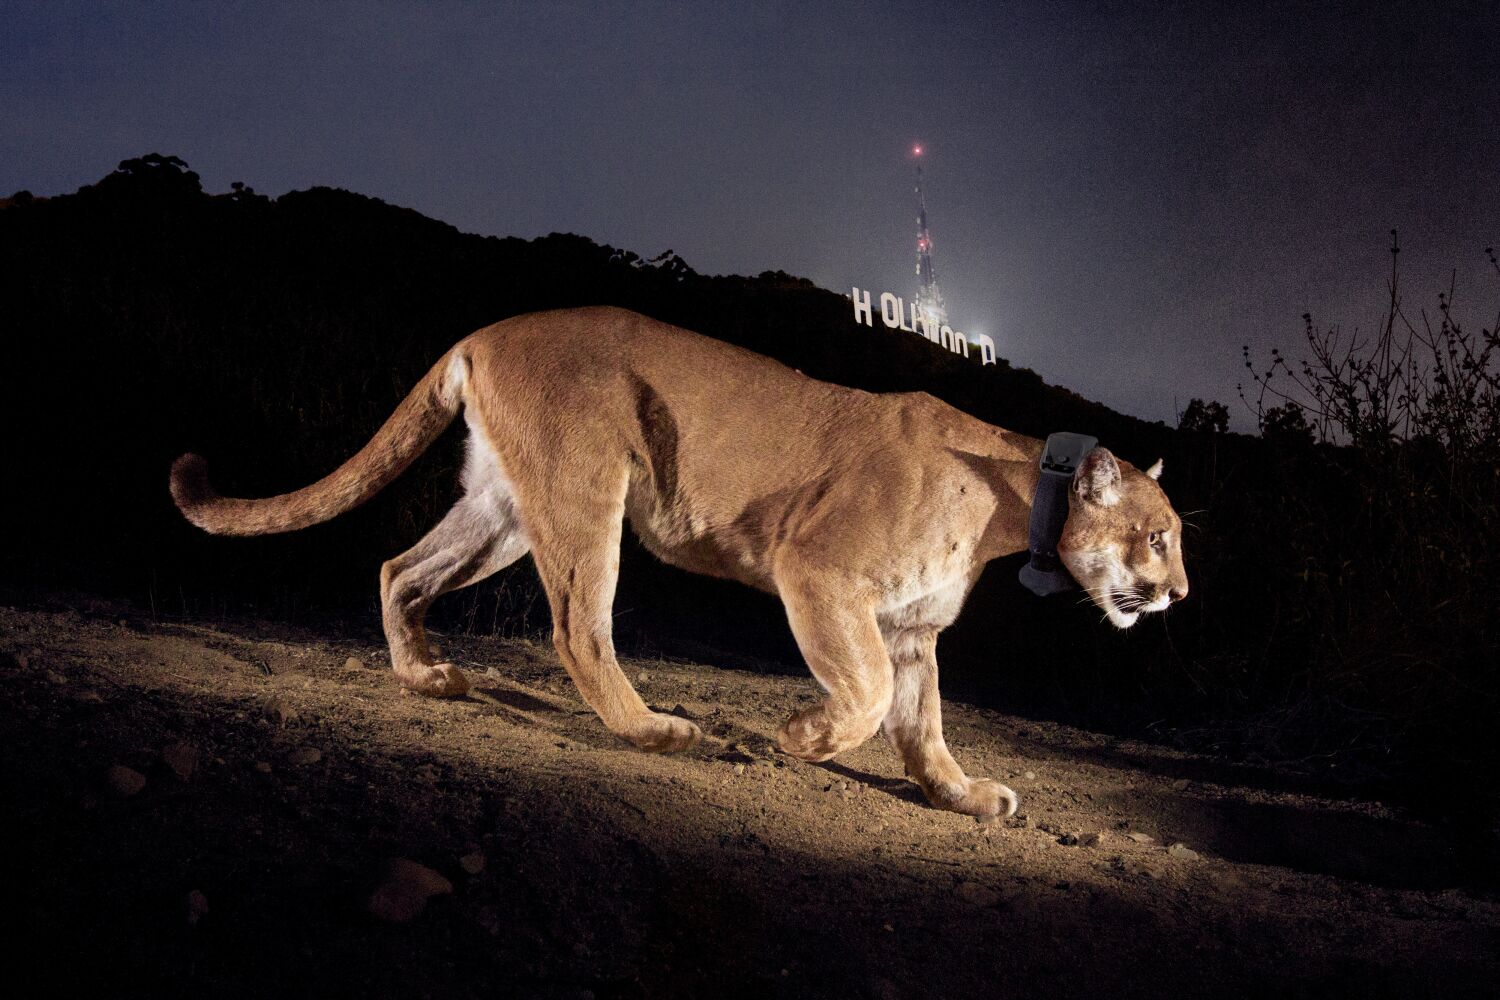 Stunning photos of L.A.'s celebrity mountain lion P-22